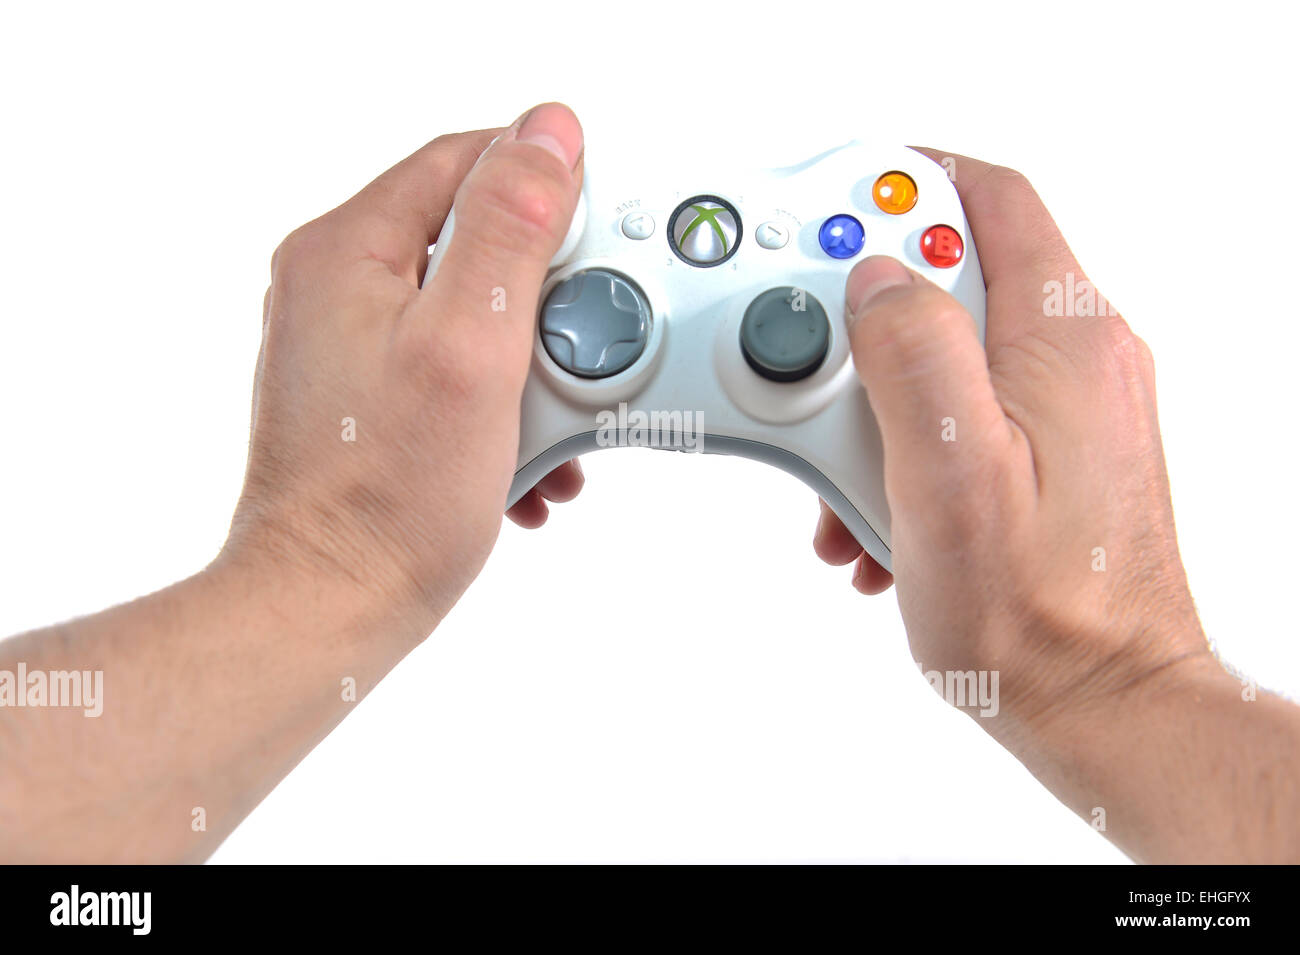 first person view of a person playing with an xbox 360 Microsoft controller Stock Photo